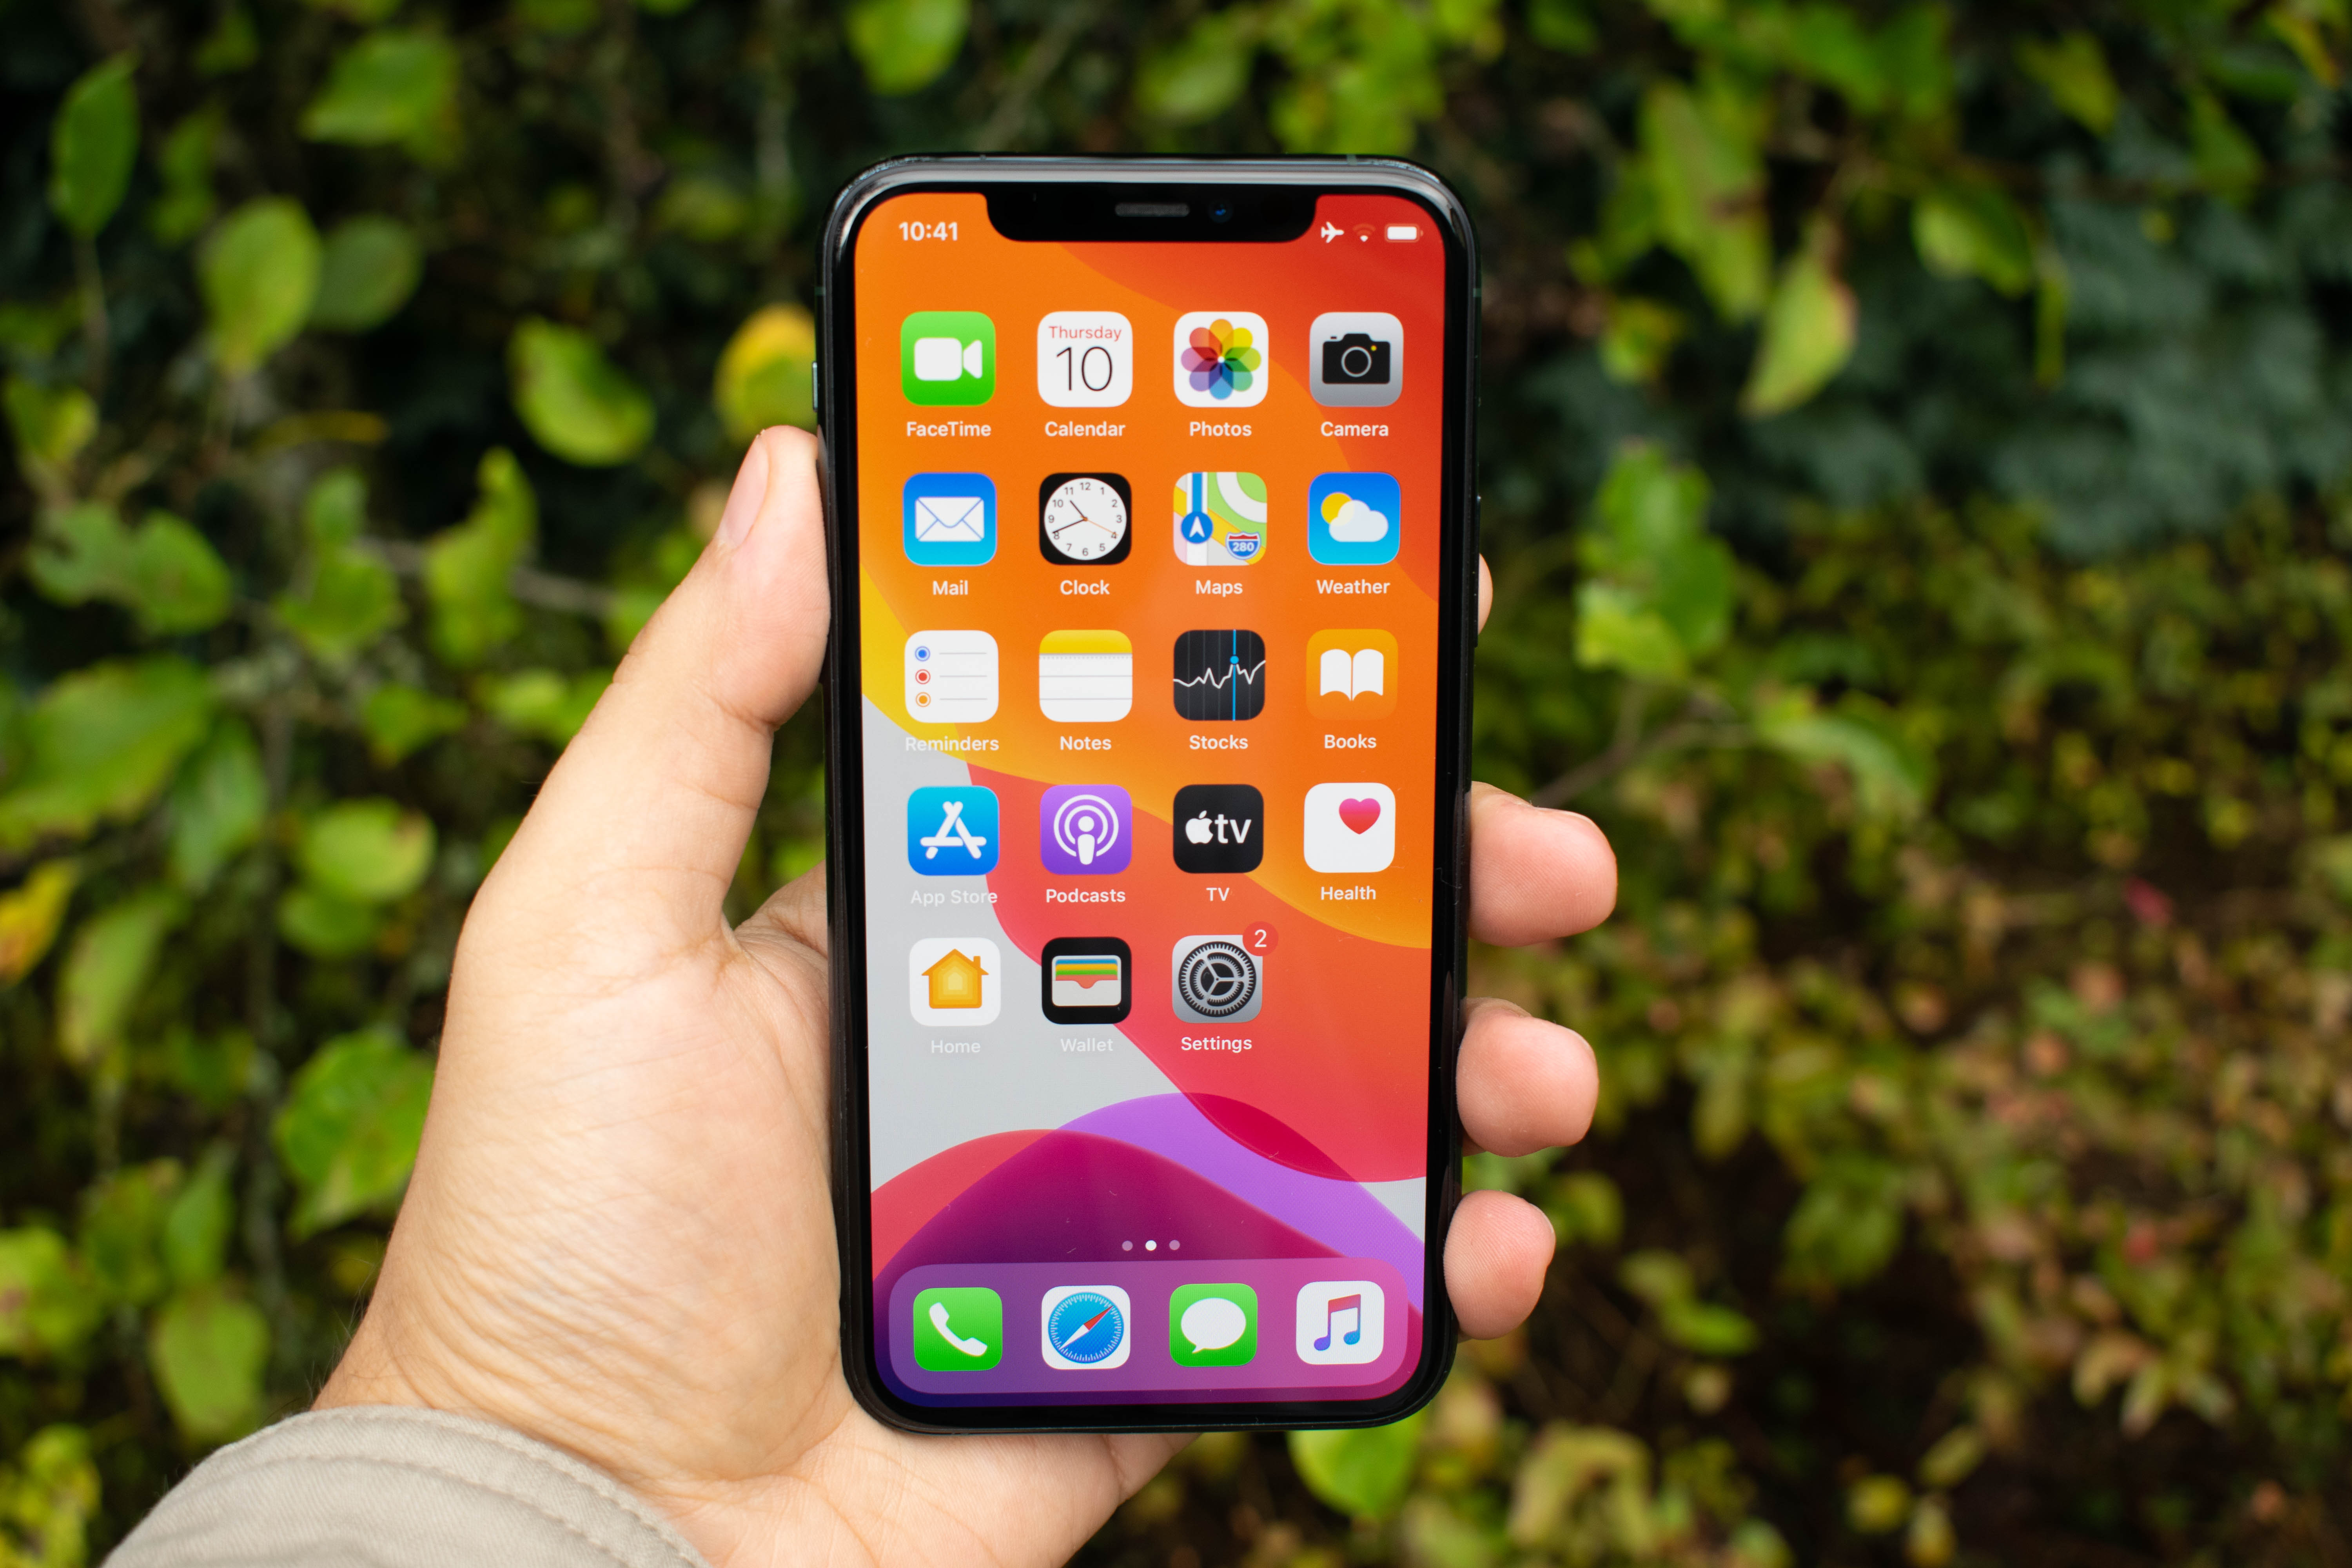 The Apple iPhone 11, 11 Pro & 11 Pro Max Review: Performance